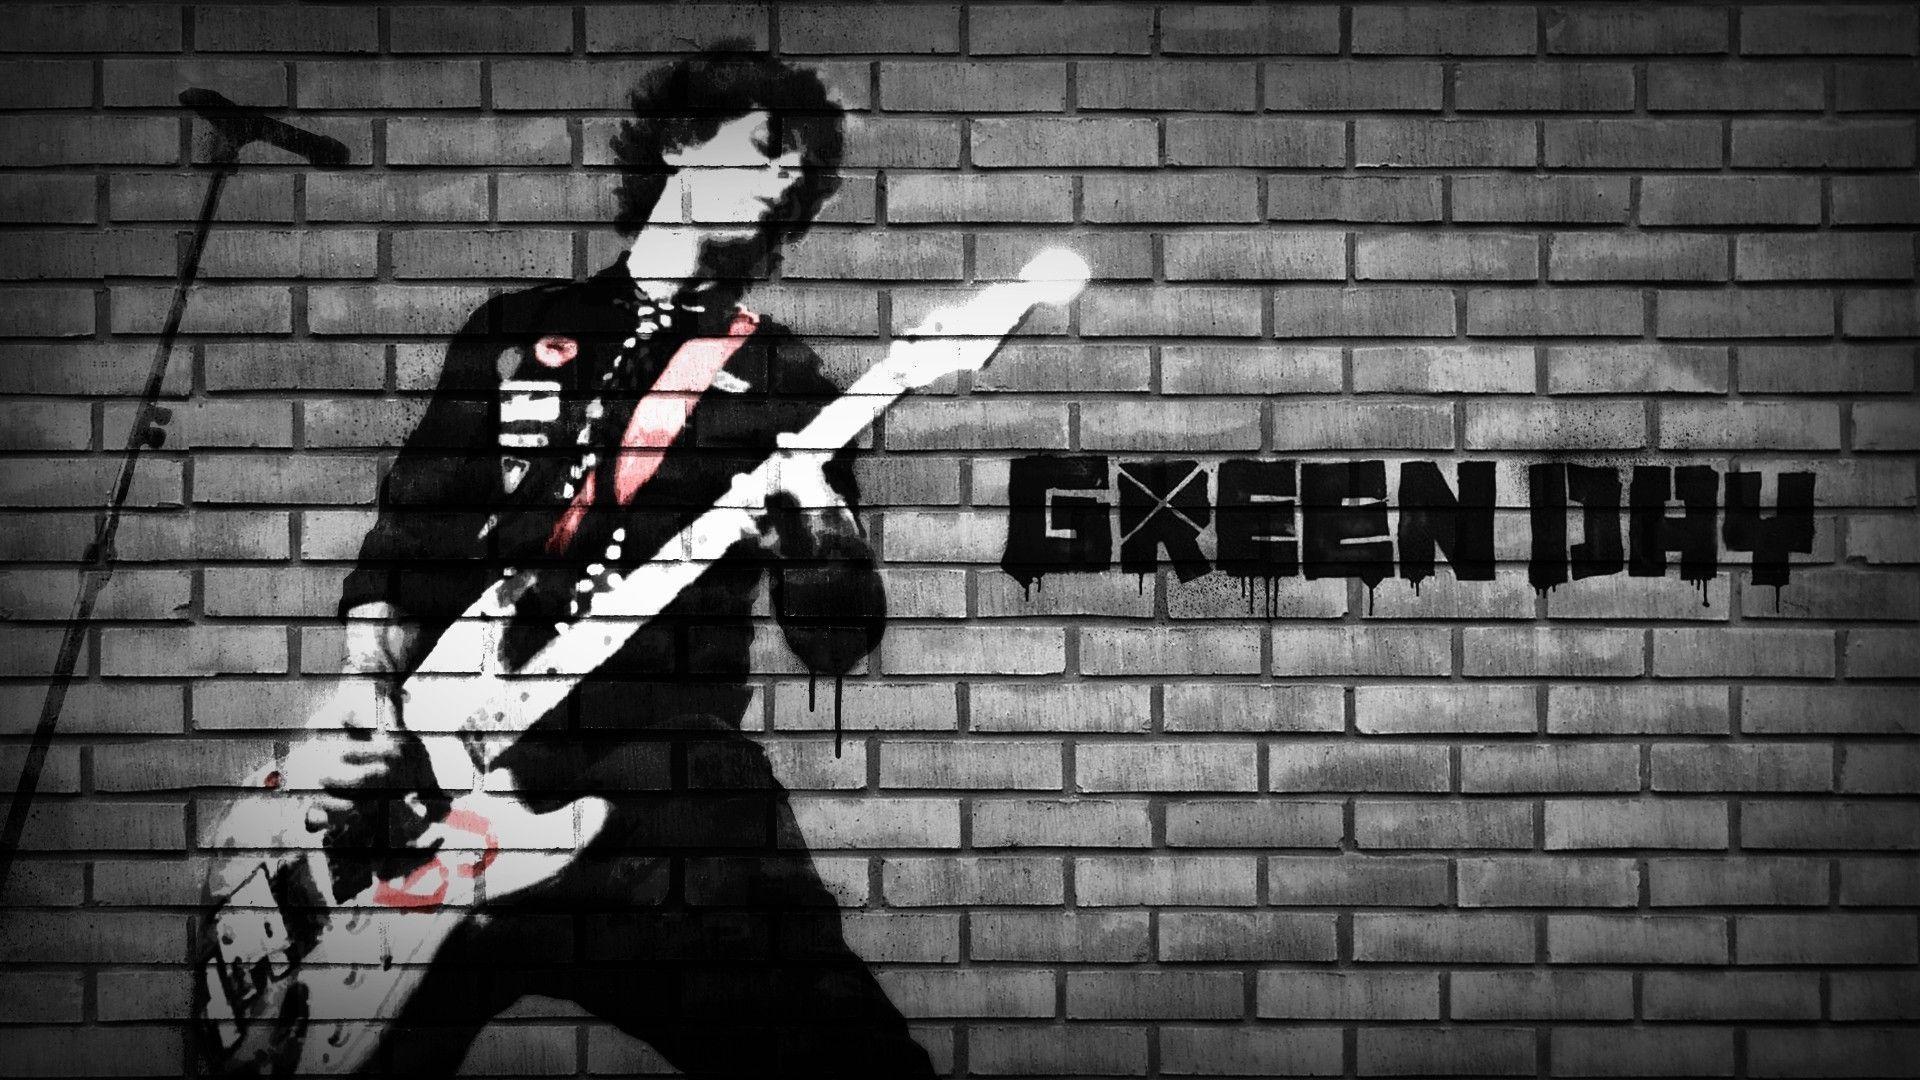 Billie Joe Armstrong with a guitar from Green Day free desktop